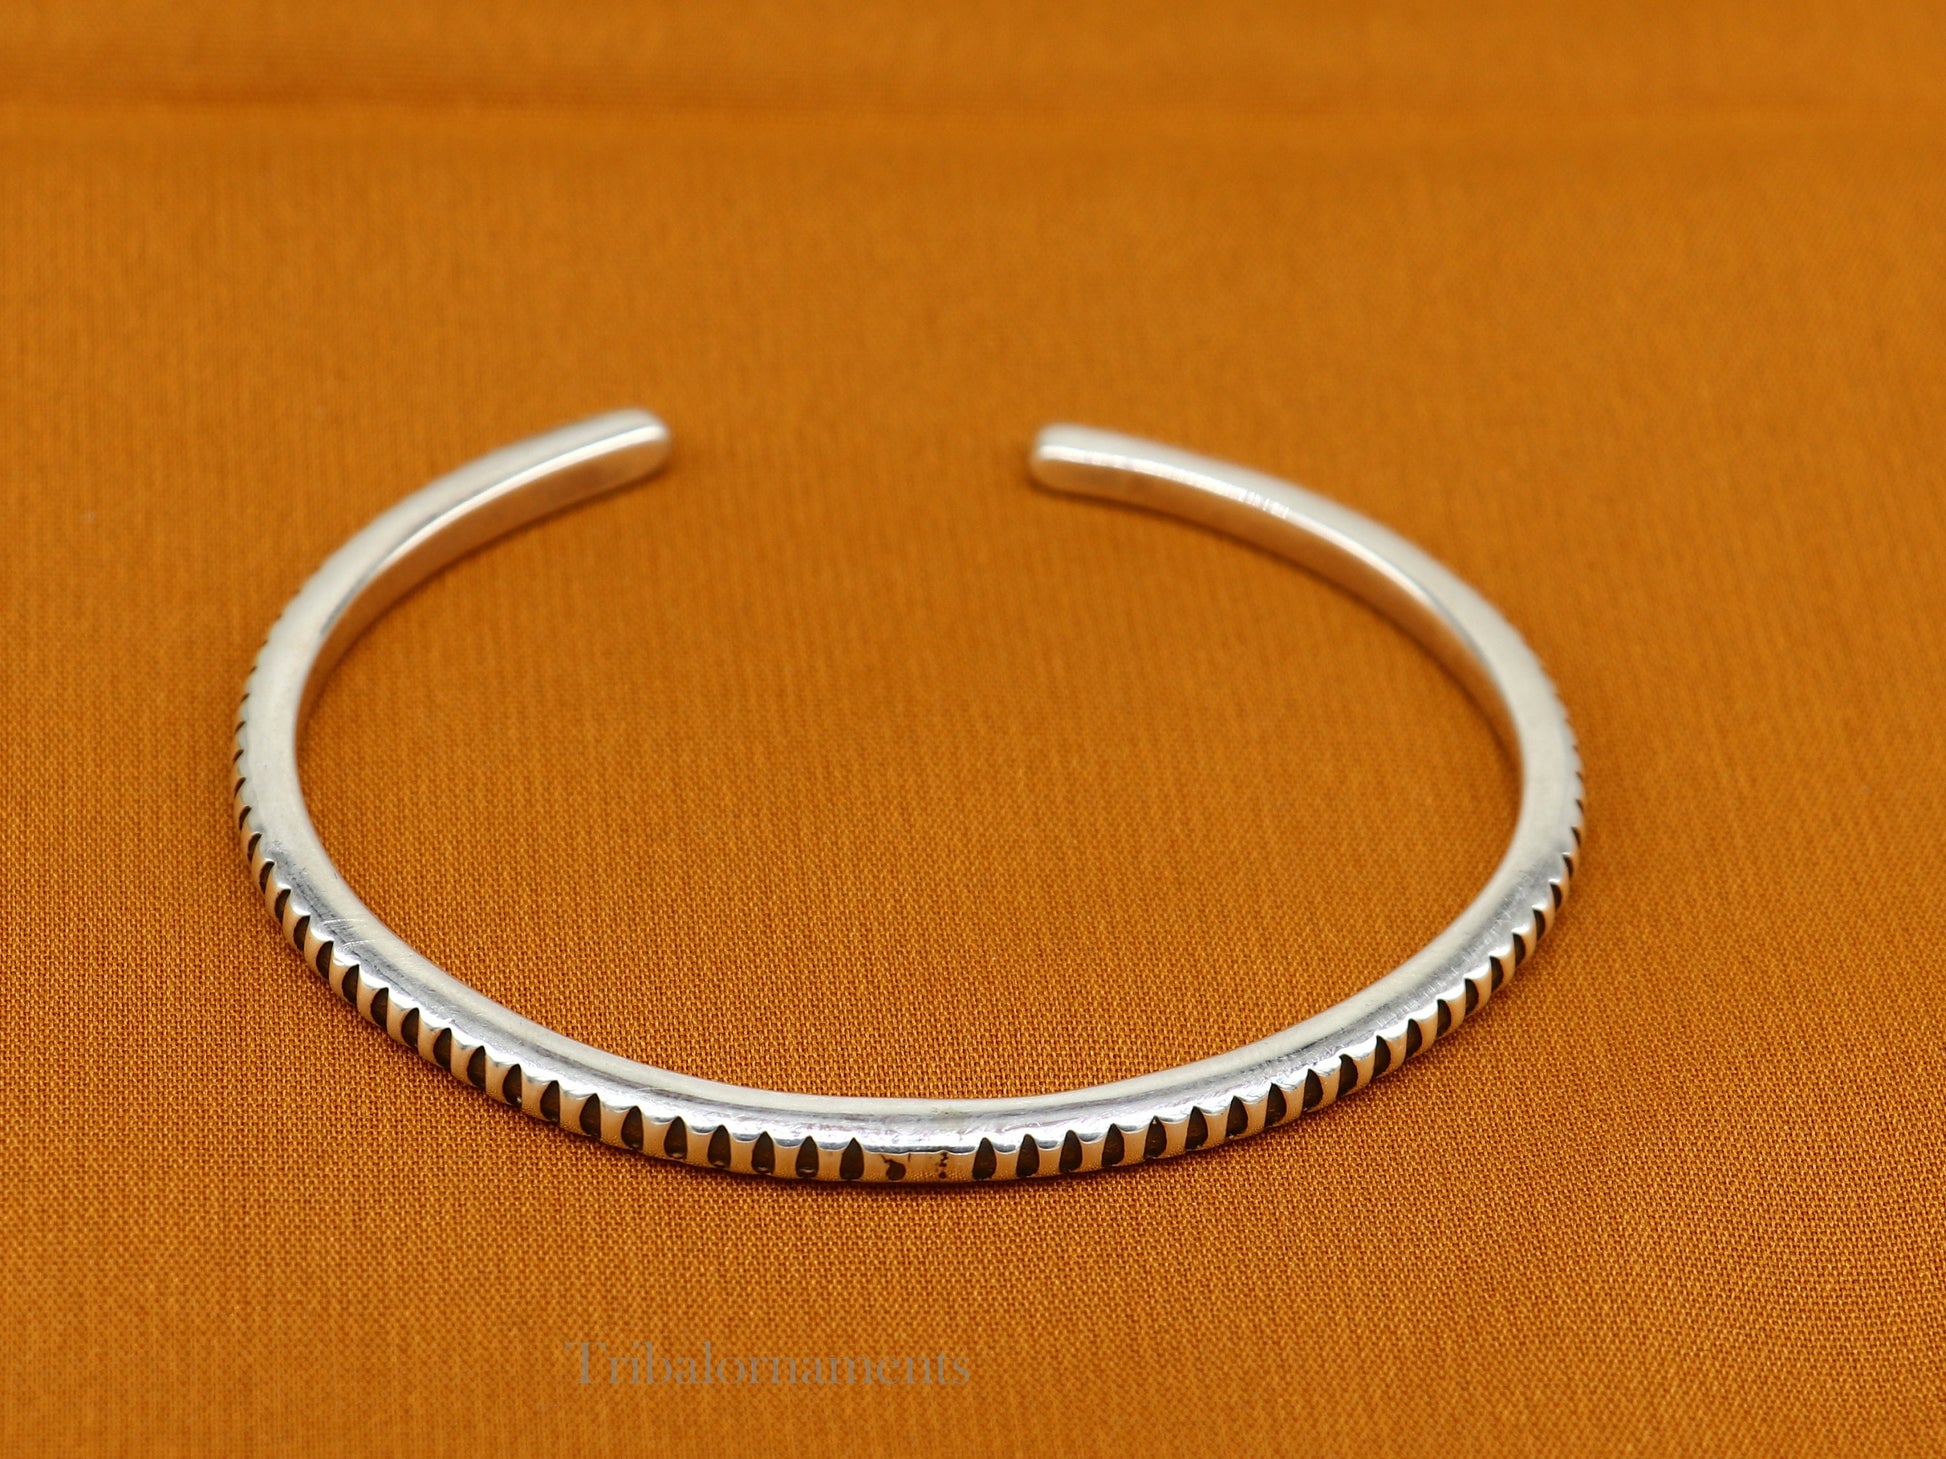 solid 925 sterling silver handmade adjustable cuff bangle bracelet unsex gifting jewelry, best gift cuff bracelet from india nsk375 - TRIBAL ORNAMENTS